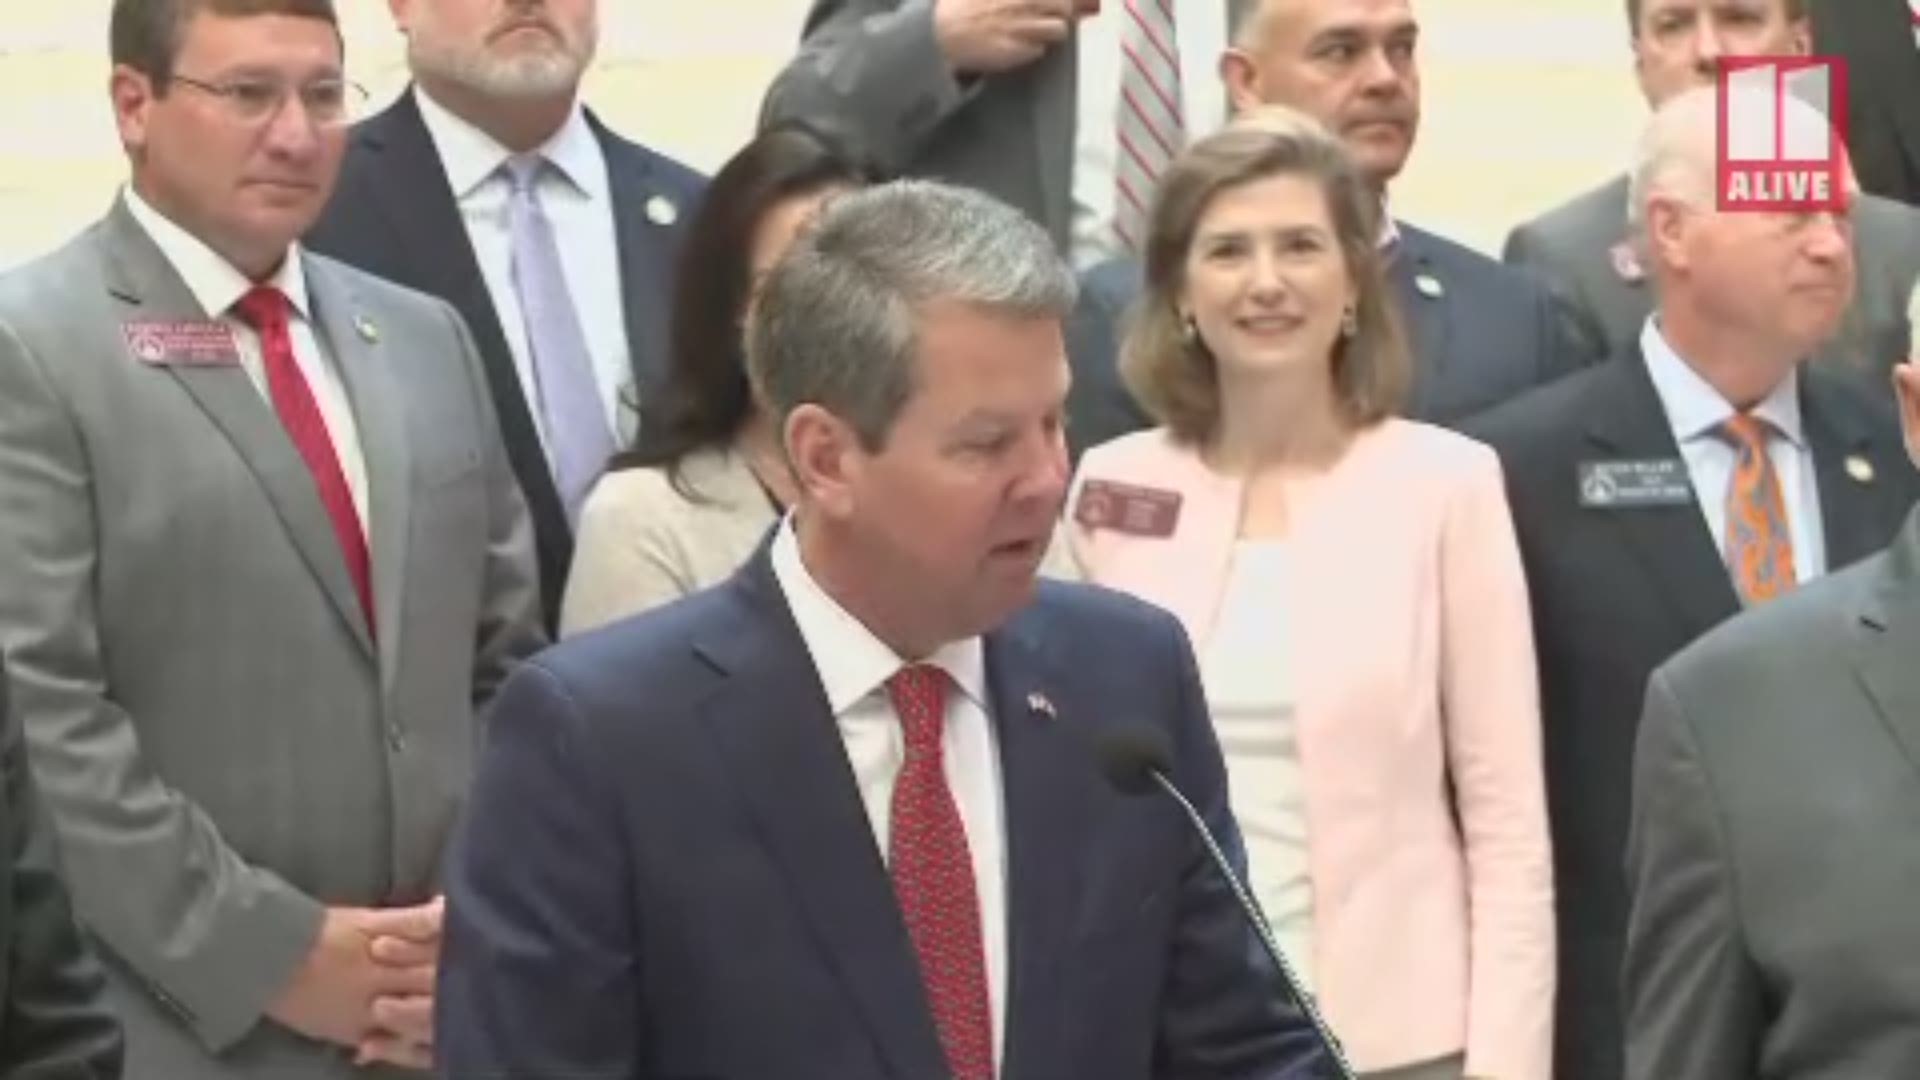 Gov. Brian Kemp, state Attorney General Chris Carr and others announced the six-person unit specially created for prosecuting human trafficking cases in Georgia on Friday.